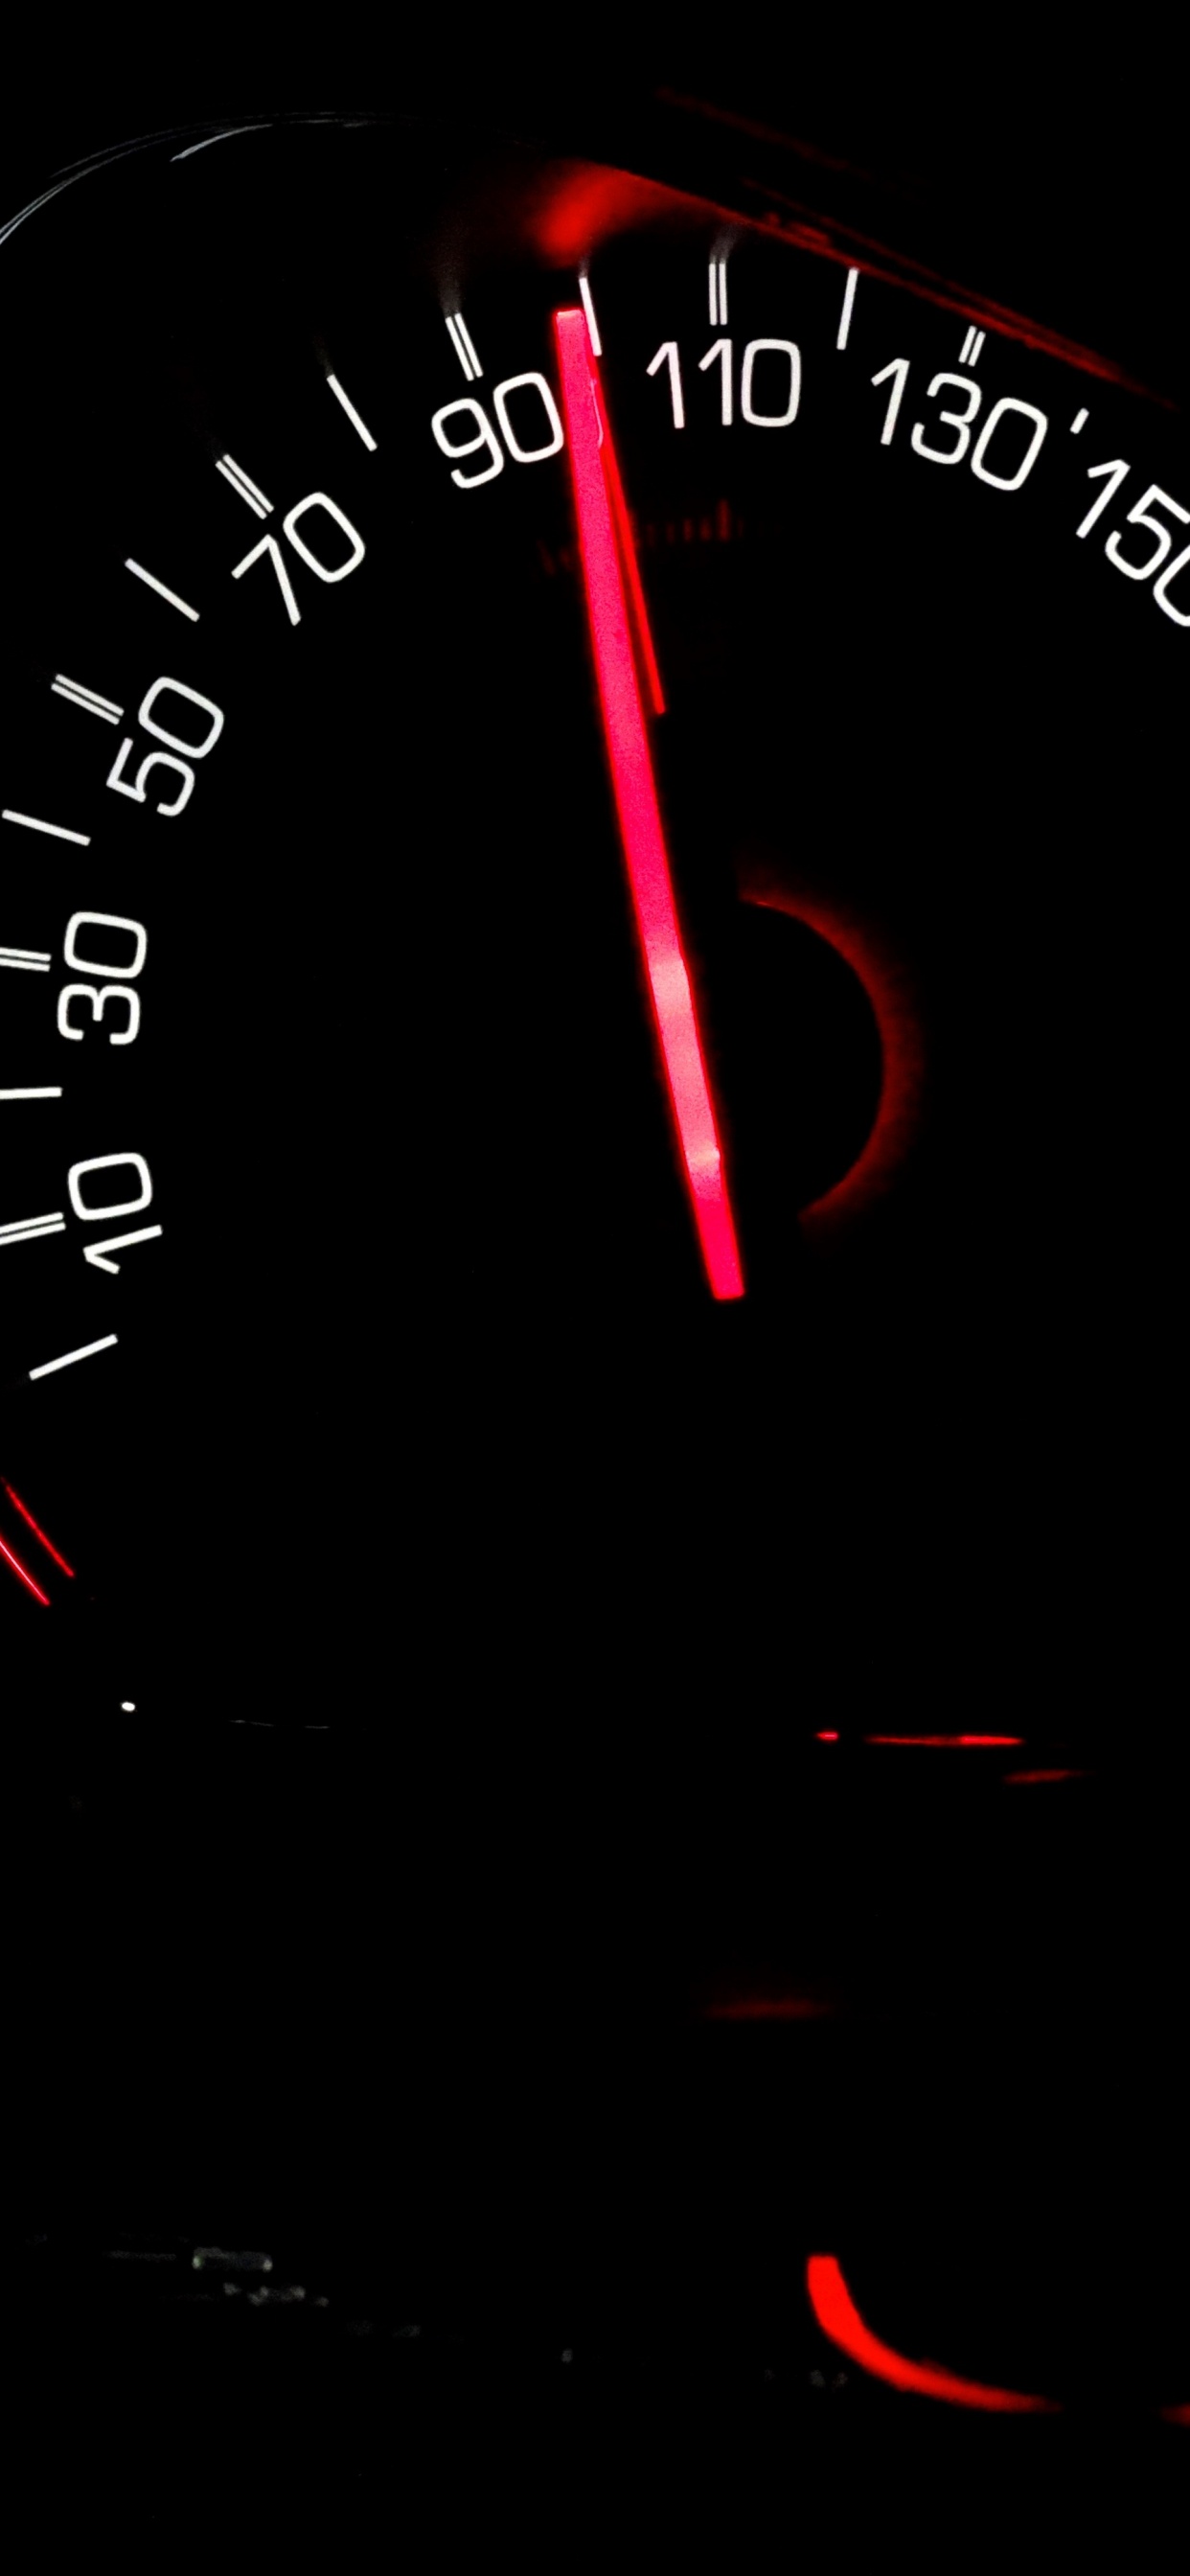 Black and Red Speedometer at 0. Wallpaper in 1242x2688 Resolution